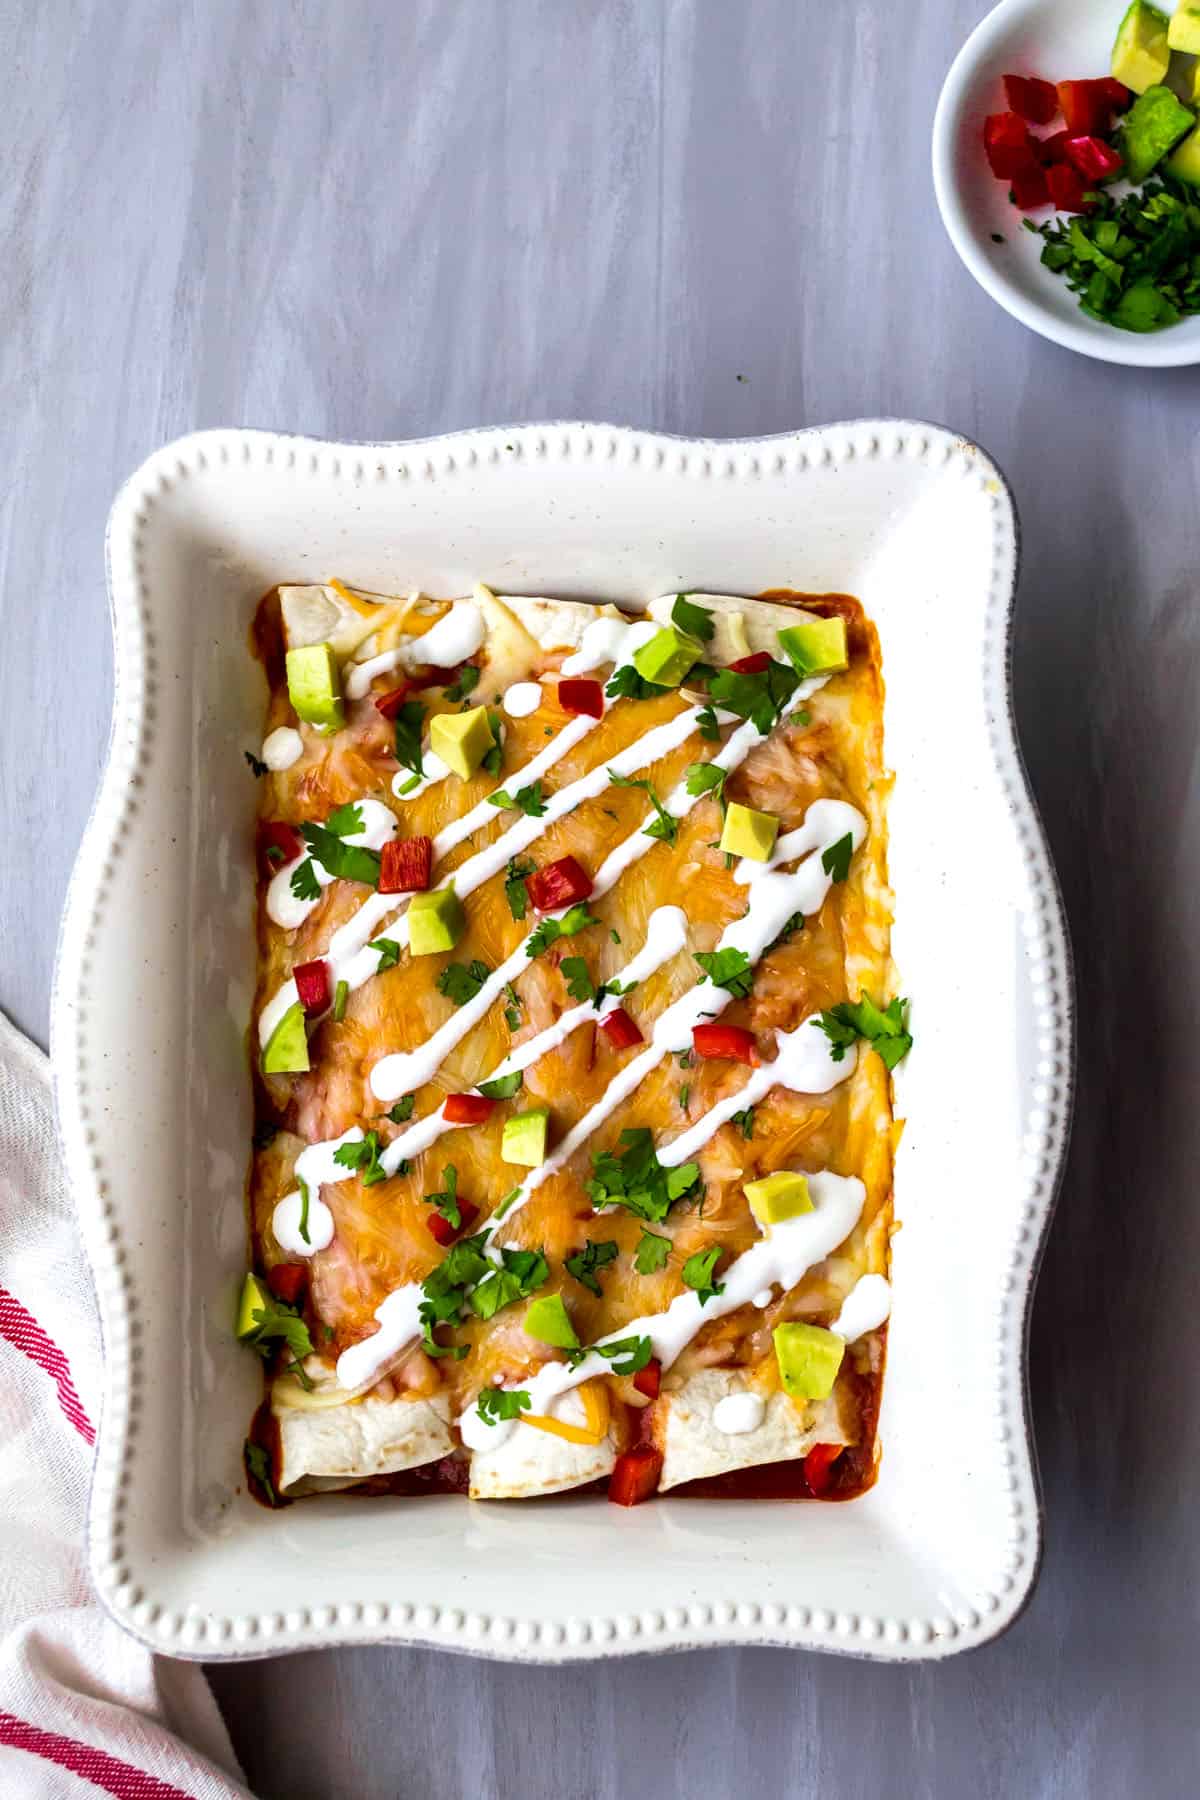 Vegetarian enchiladas in a white baking dish drizzled with sour cream